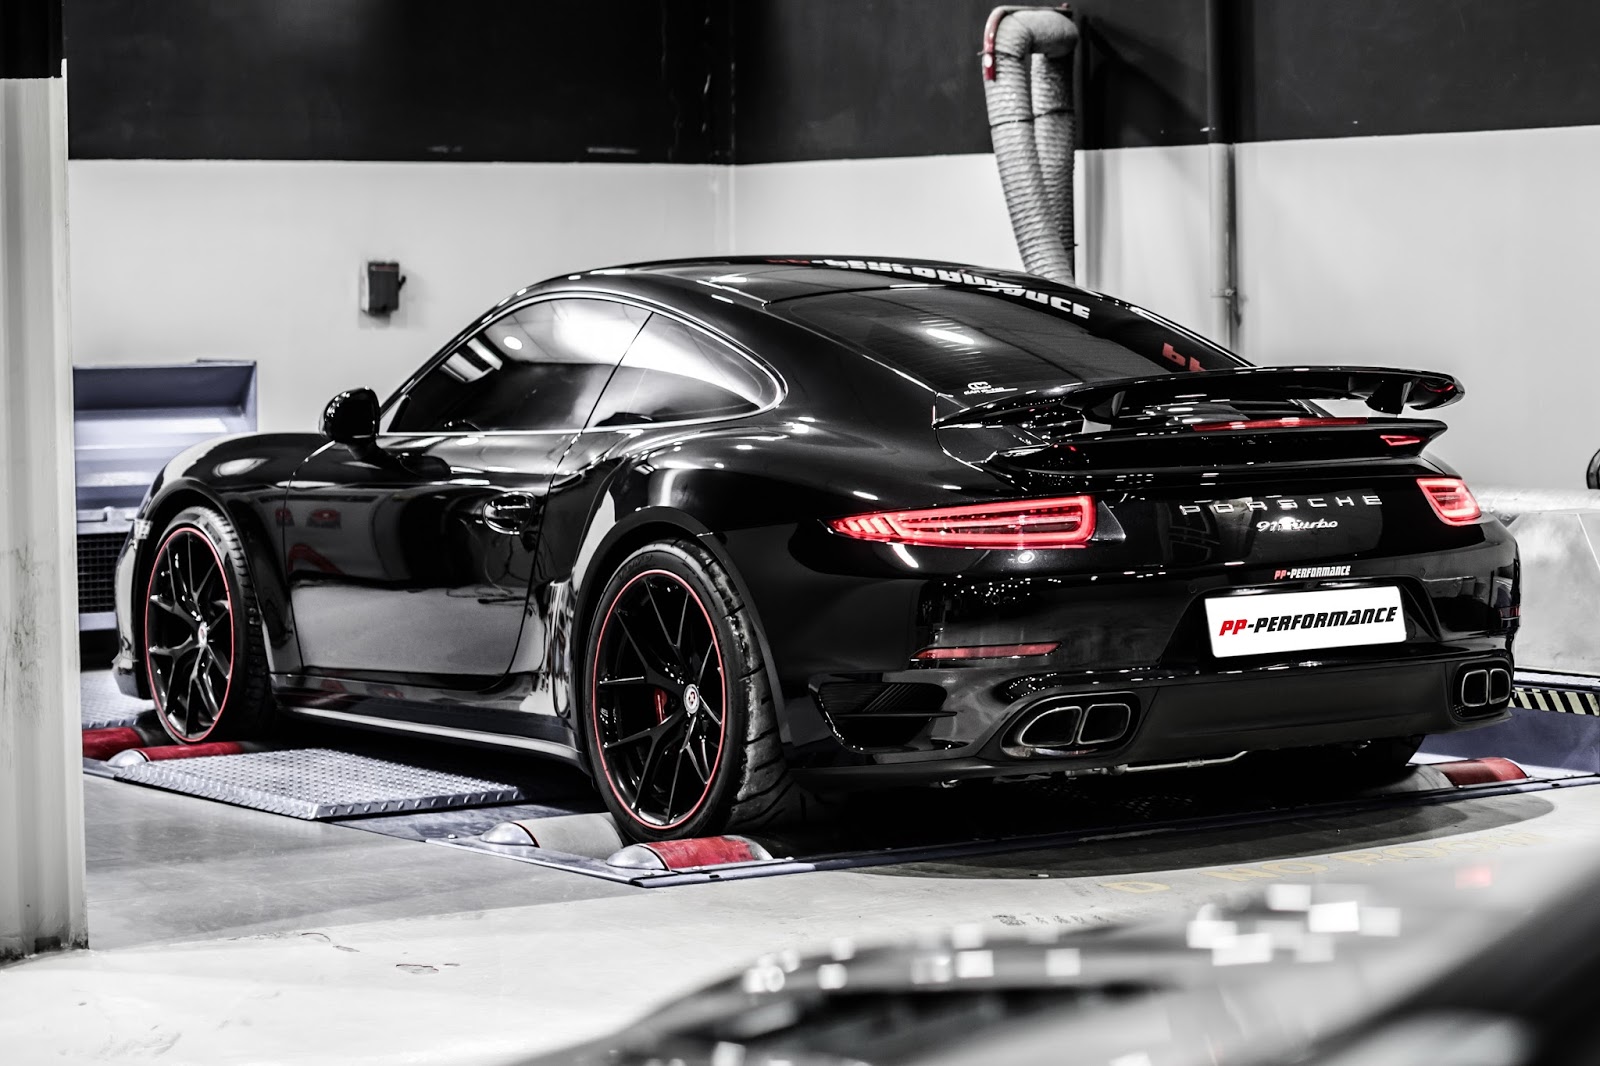 PP Performance-Tuned Porsche 991 Turbo Does 1/4 Mile in 9.9 Sec [w/Video] | Carscoops